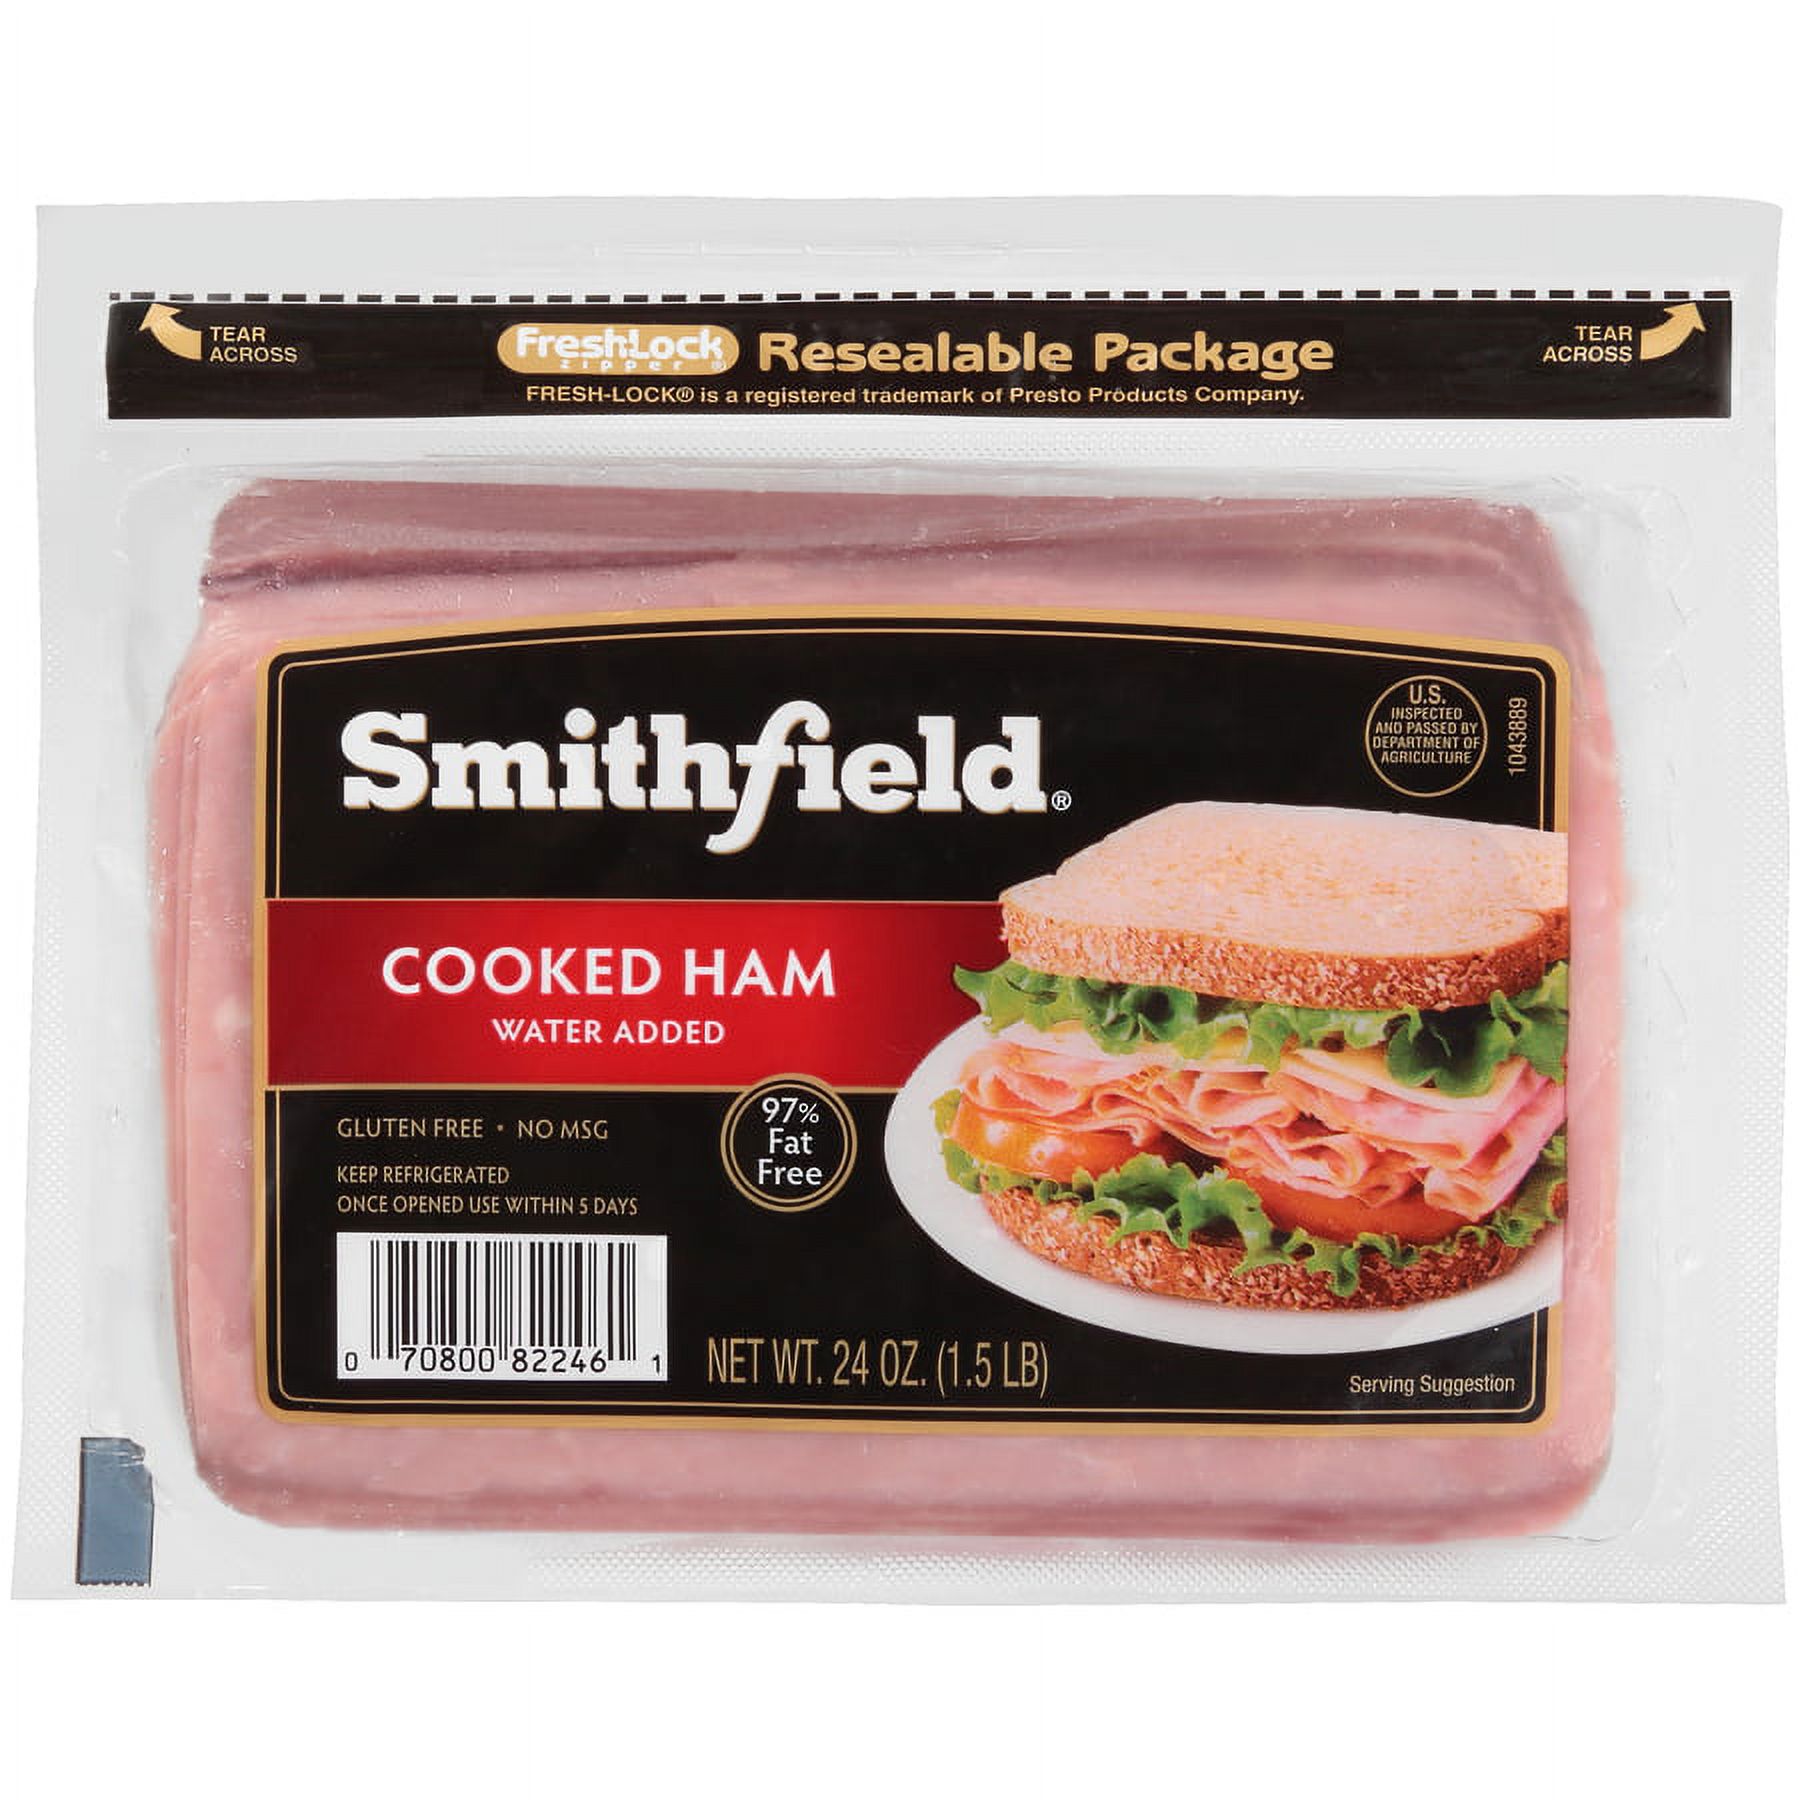 Smithfield Pre-Sliced Cooked Ham Lunch Meat, 24 oz - image 1 of 3